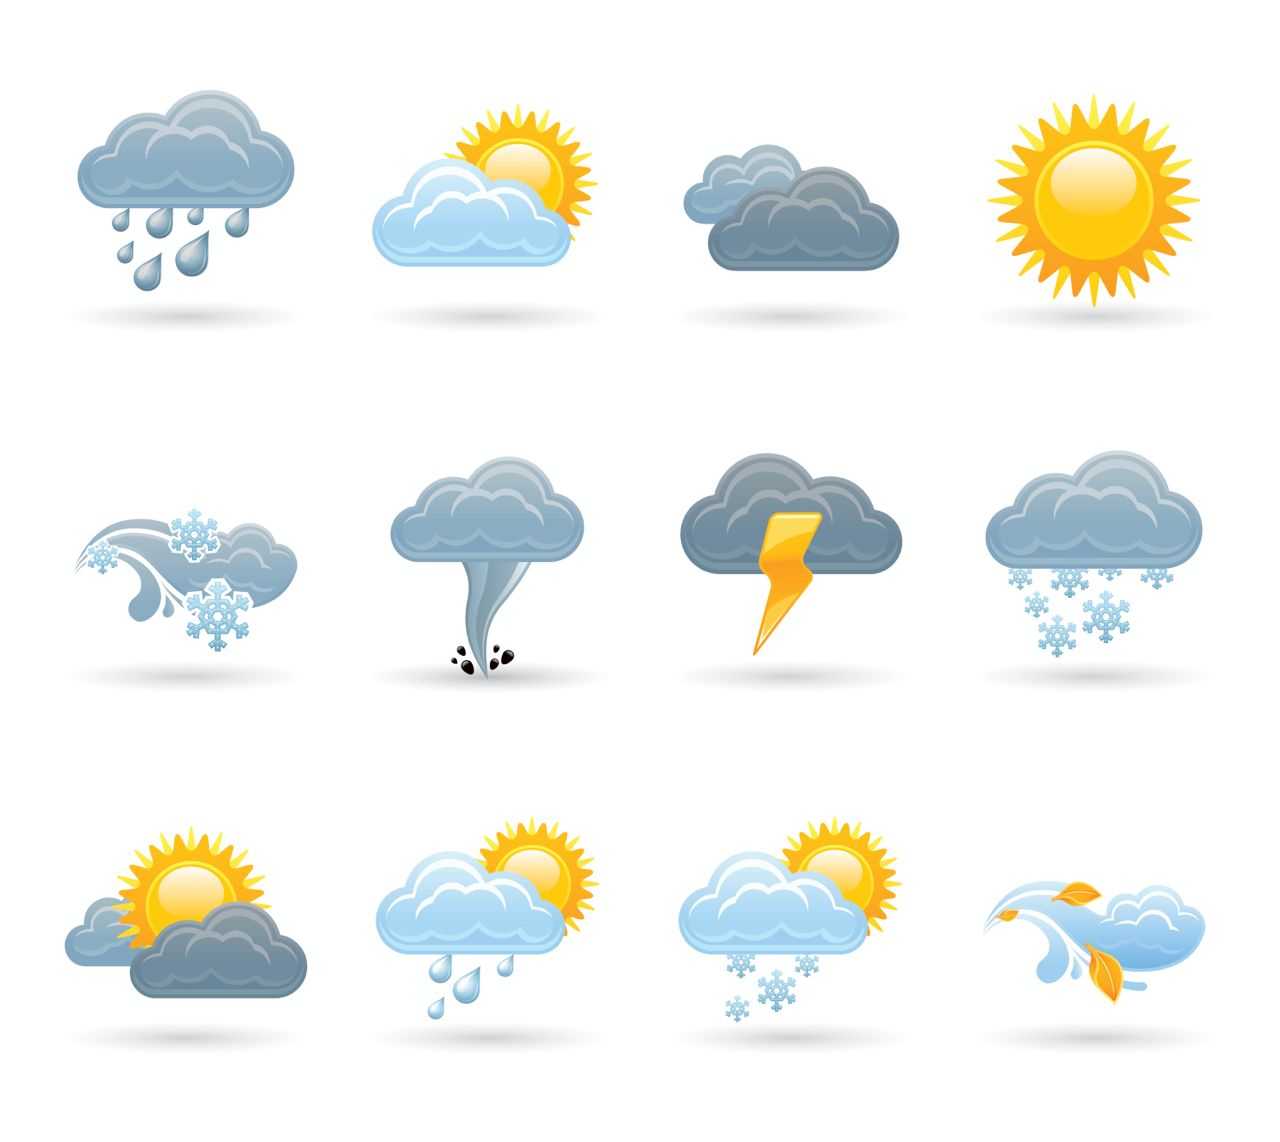 Weather For Ks1 And Ks2 Children | Weather Homework Help With Regard To Kids Weather Report Template